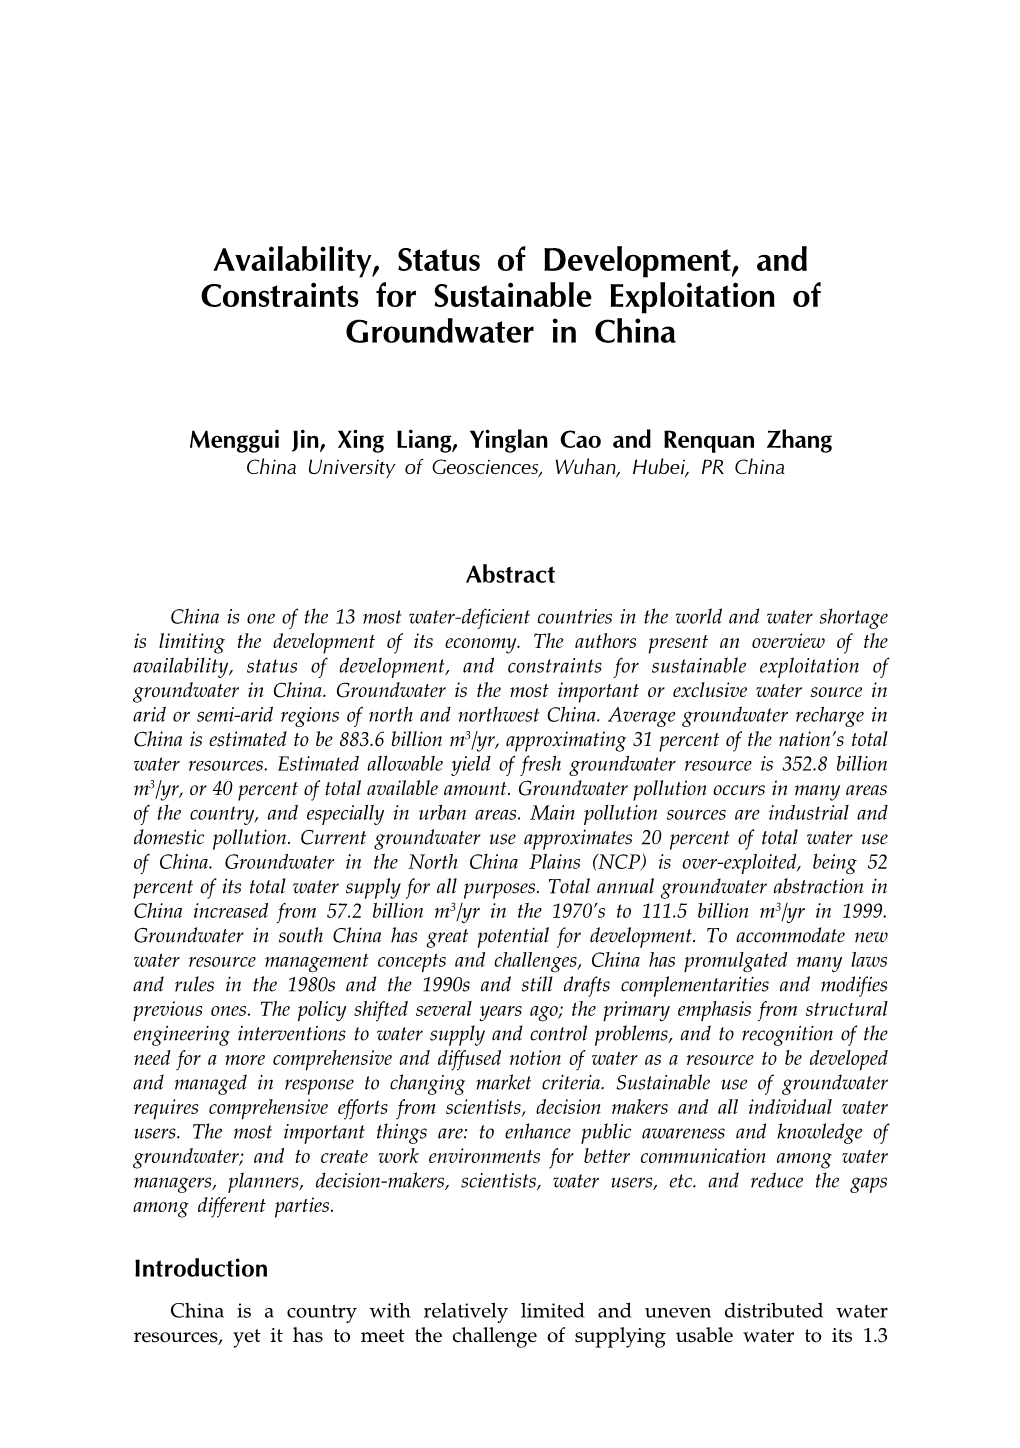 Availability, Status of Development, and Constraints for Sustainable Exploitation of Groundwater in China